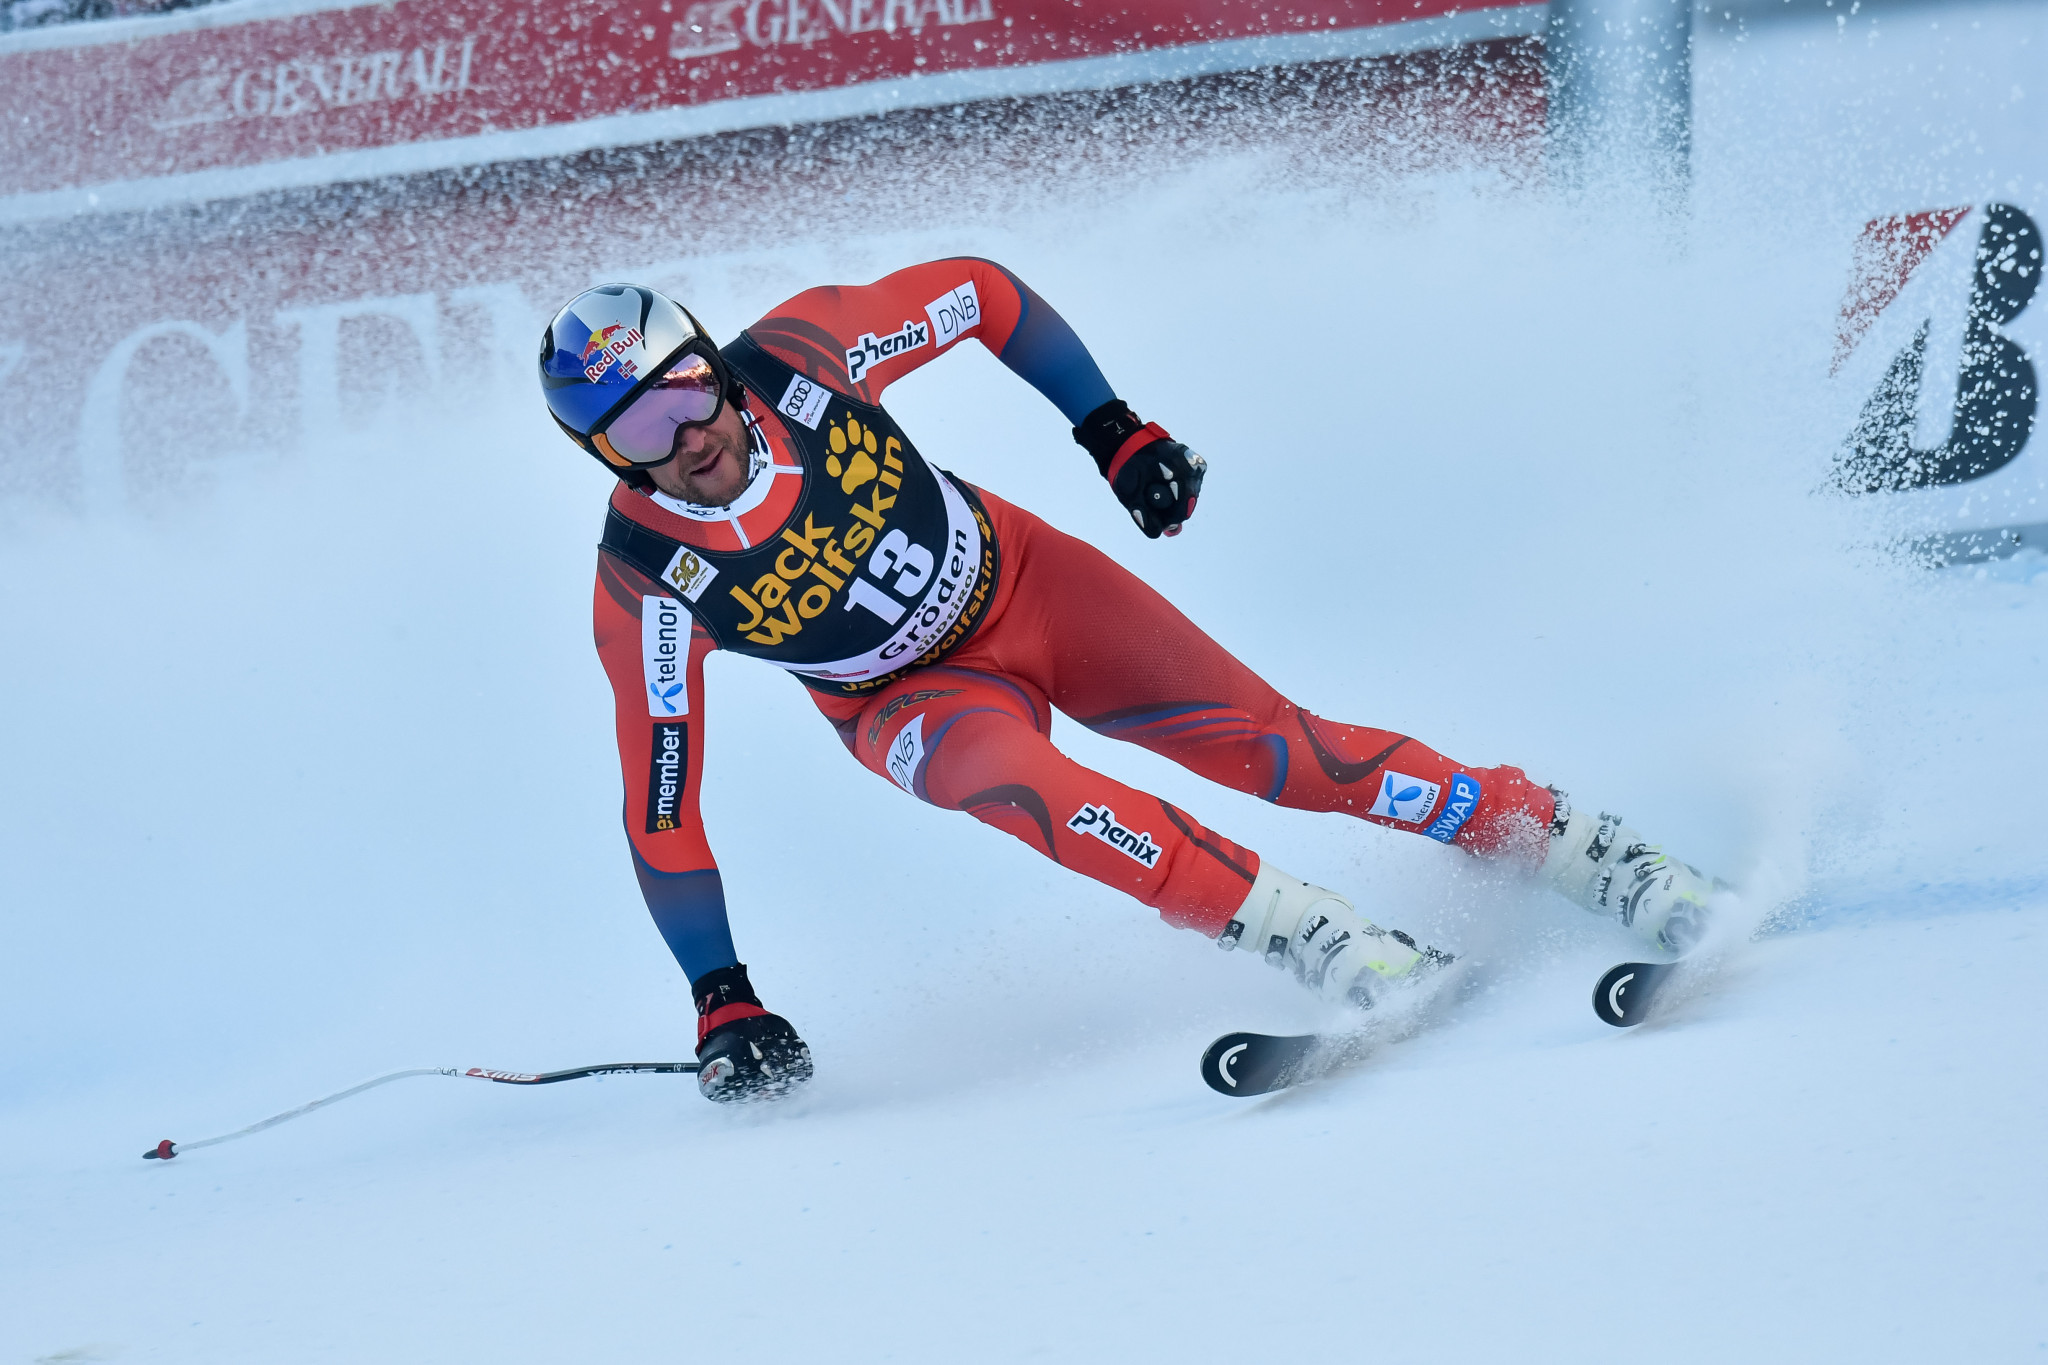 Norway's Aksel Lund Svindal won today's men's downhill event in Val Gardena ©Getty Images